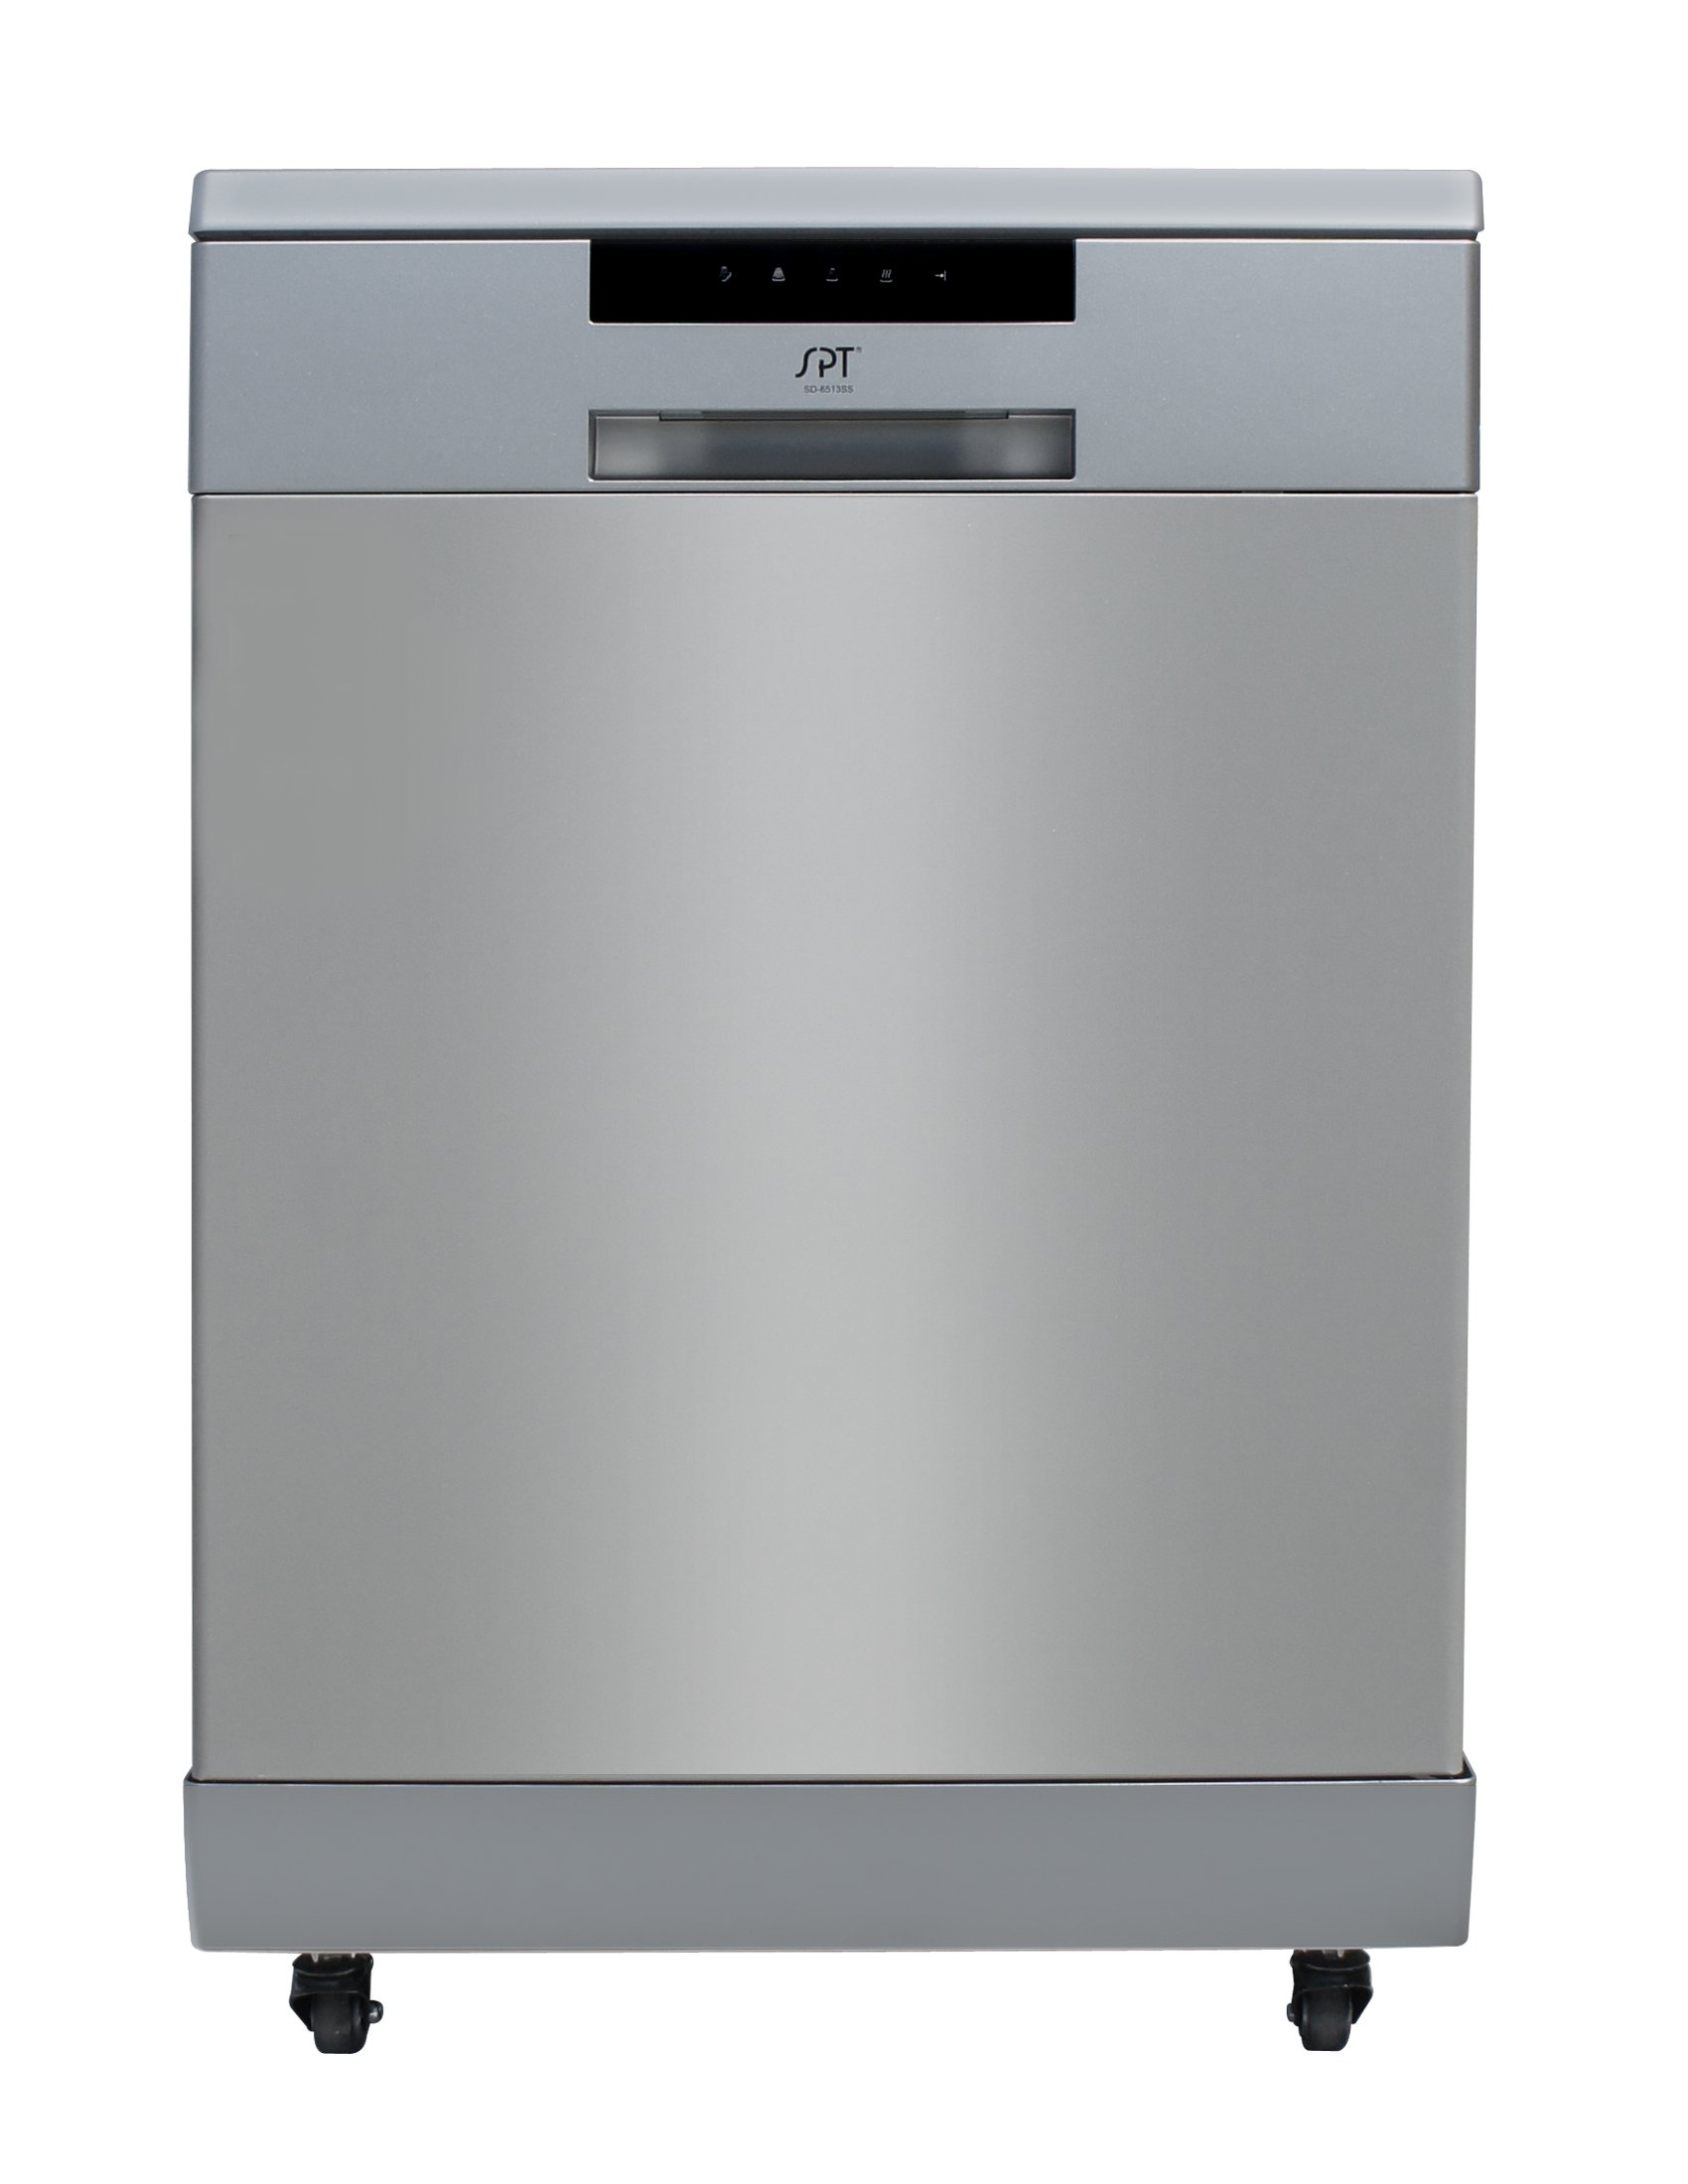 Sunpentown Energy Star 24" Portable Stainless Steel Dishwasher - Stainless Steel